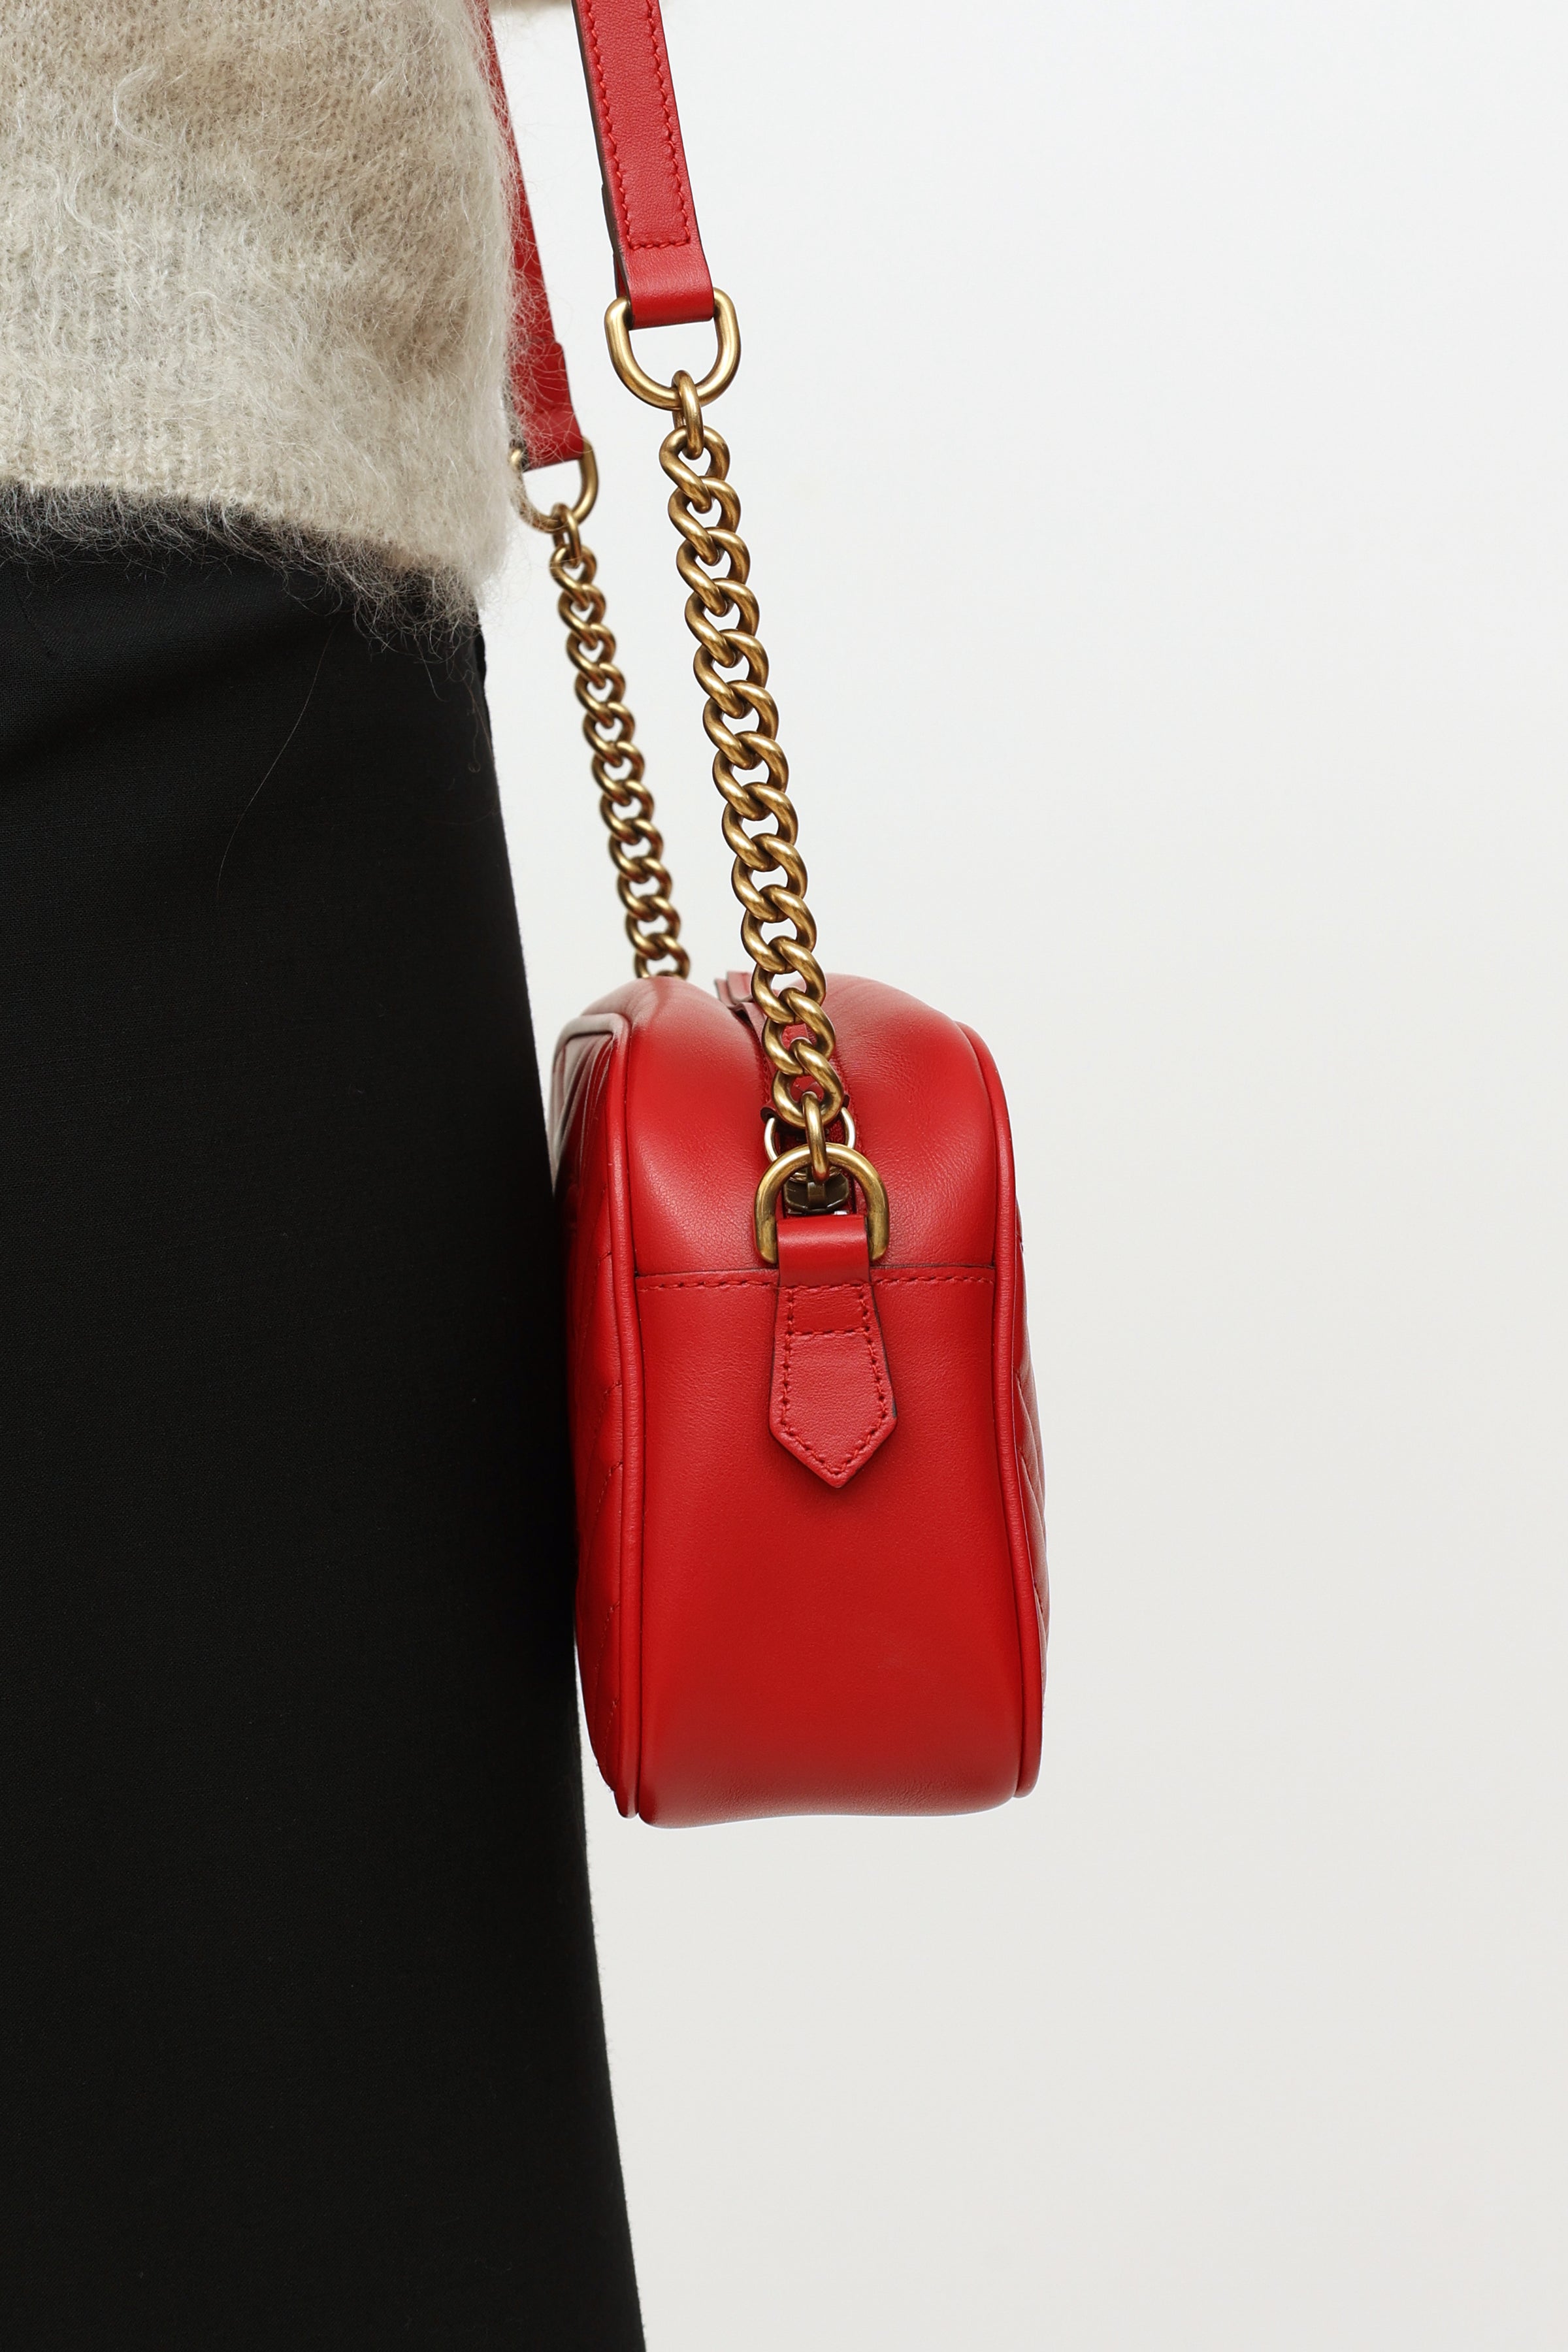 Gucci // Red GG Marmont Top Knot Bag – VSP Consignment